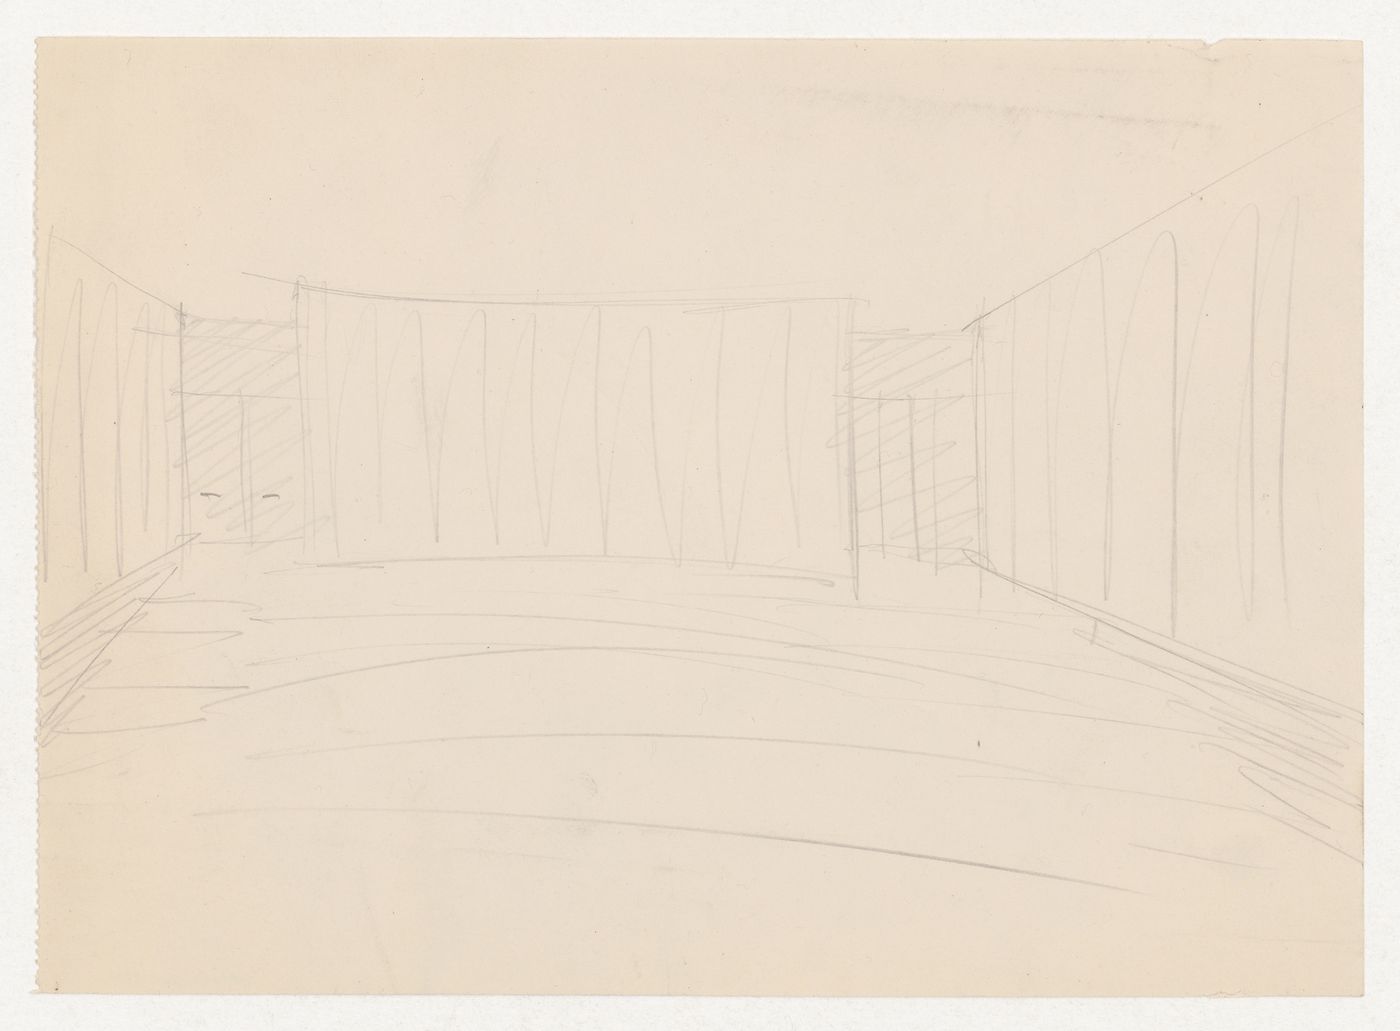 Interior perspective sketch for the auditorium for the Metallurgy Building showing the entrance, Illinois Institute of Technology, Chicago